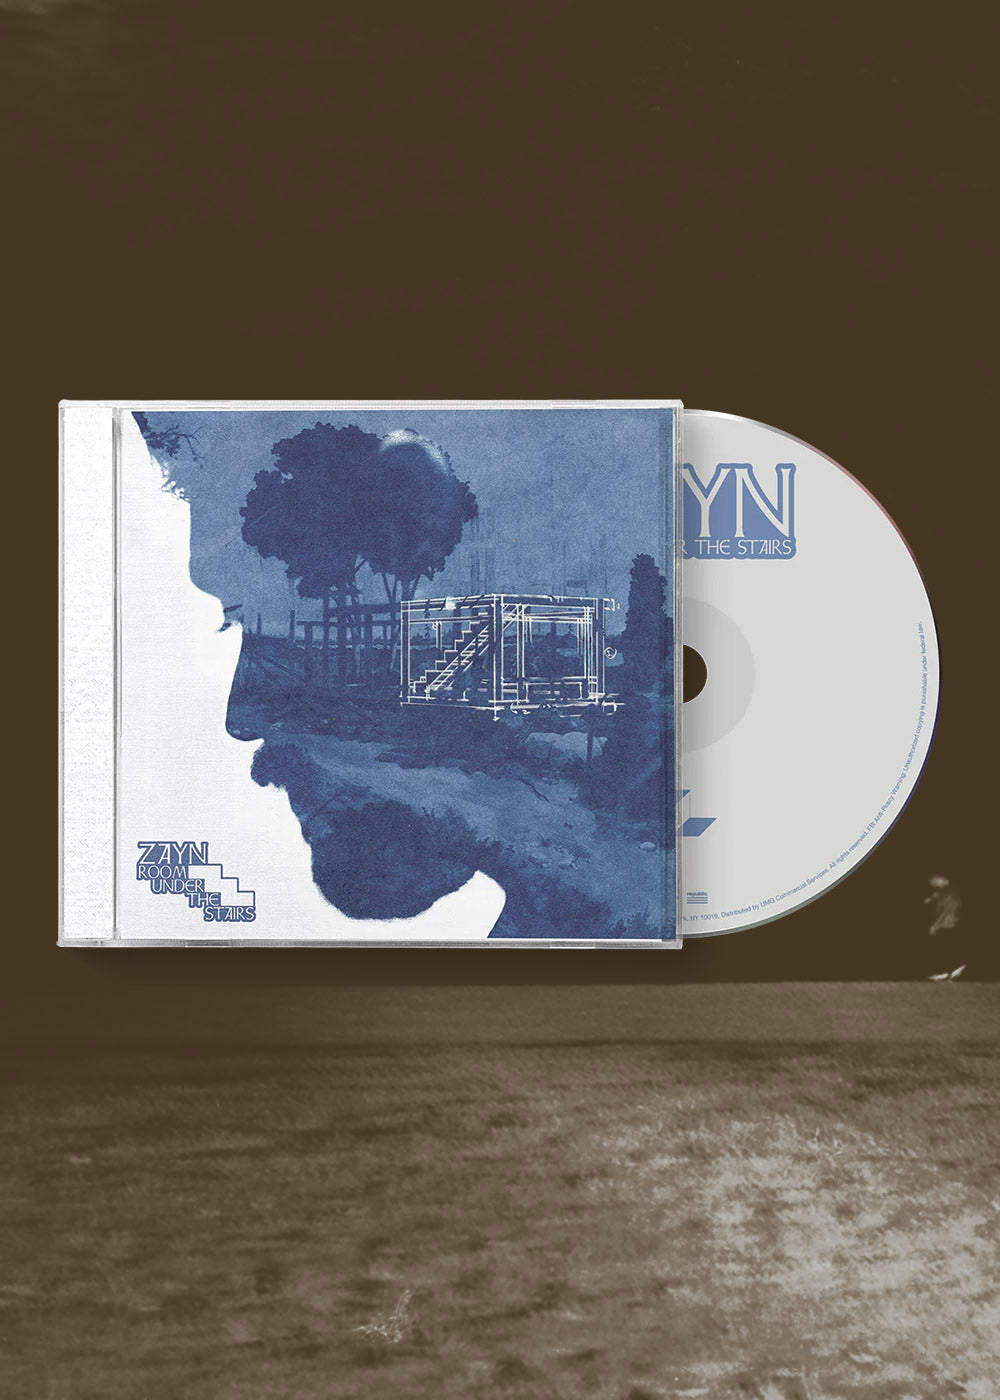 Room Under The Stairs: CD + Signed Art Card